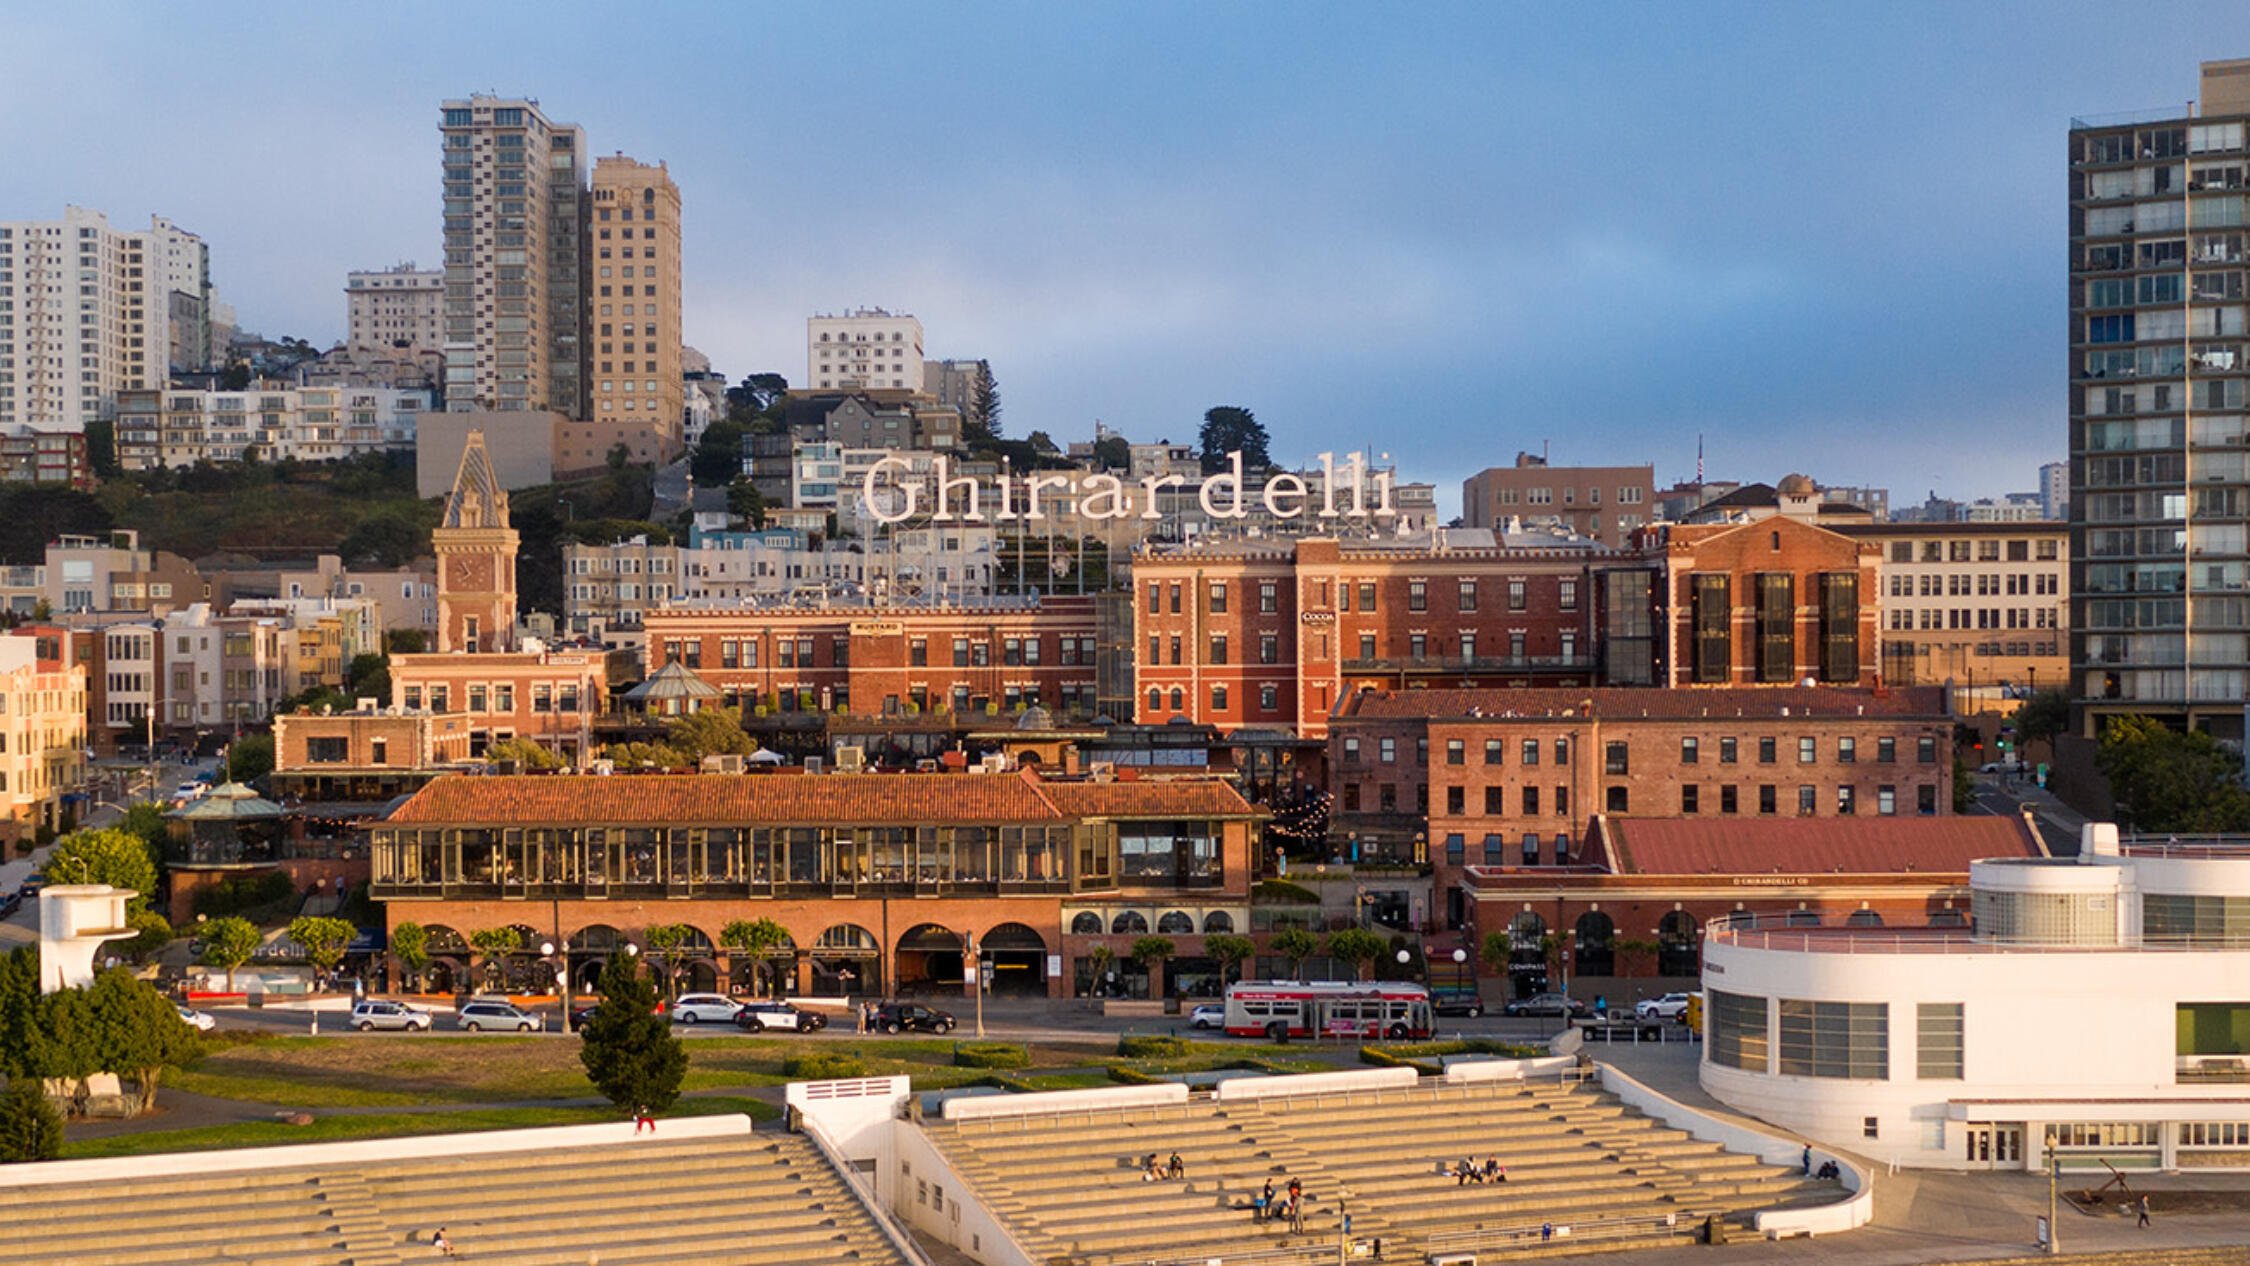 Ghirardelli Square seen from the air at sunset